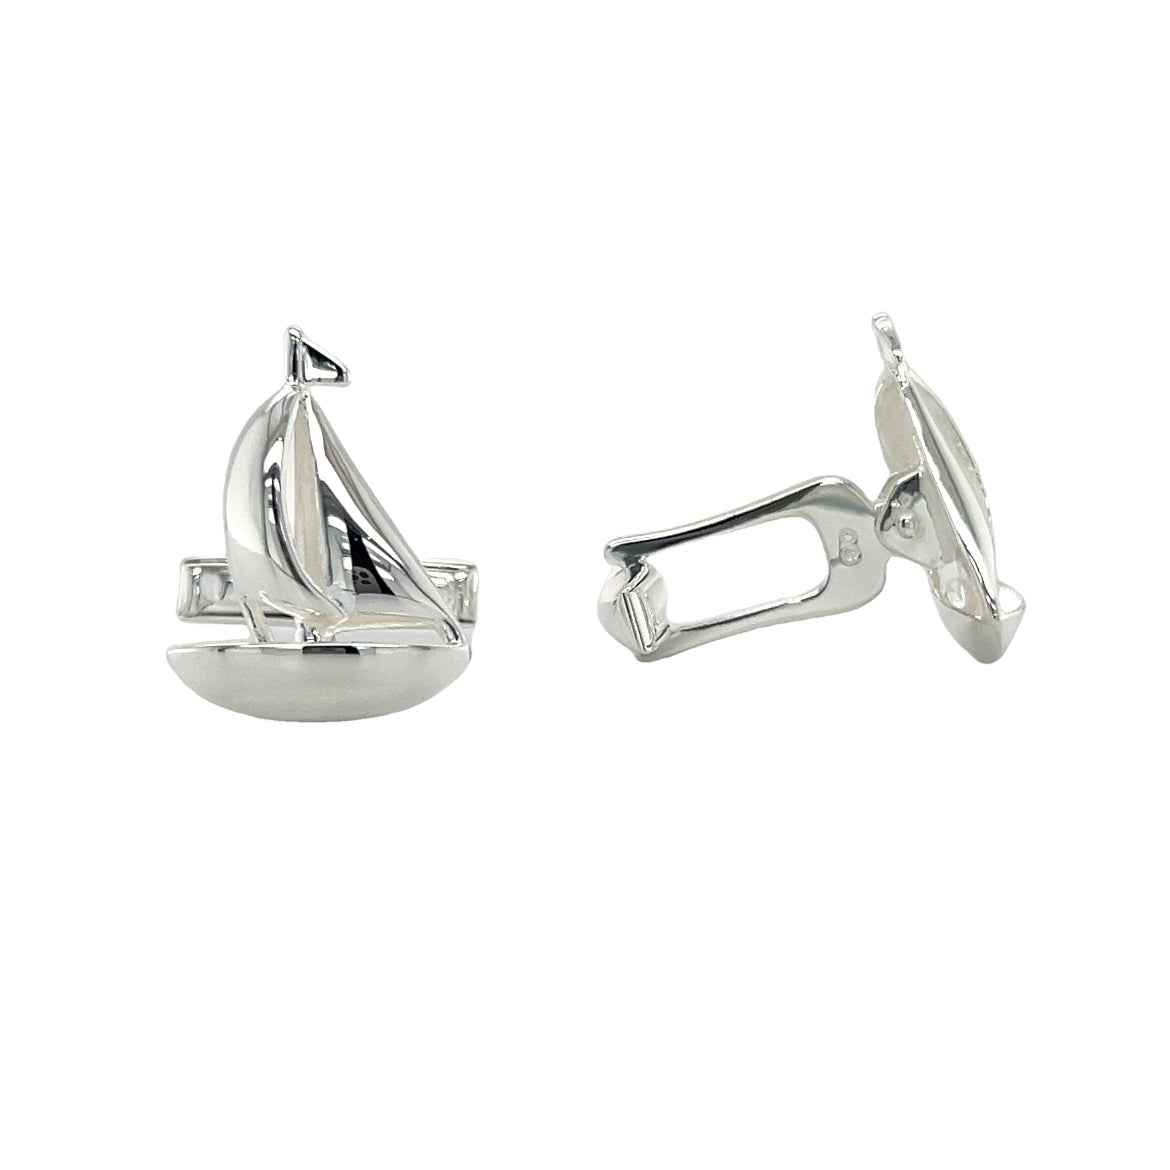 Sail Boat Cufflinks with 3D Details in Sterling Silver Front and Side View